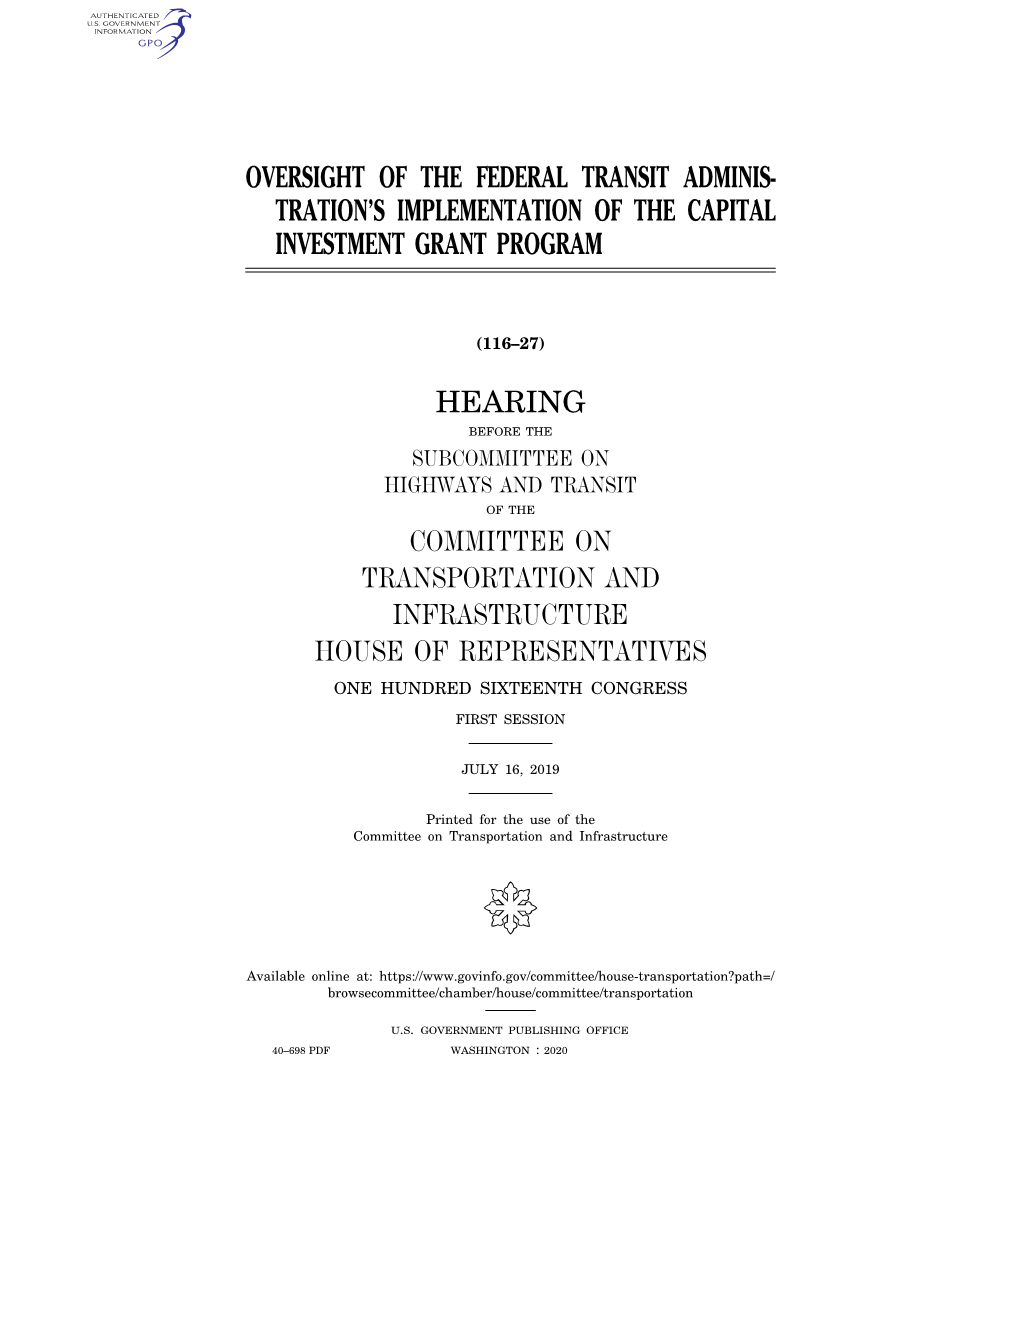 Oversight of the Federal Transit Adminis- Tration’S Implementation of the Capital Investment Grant Program